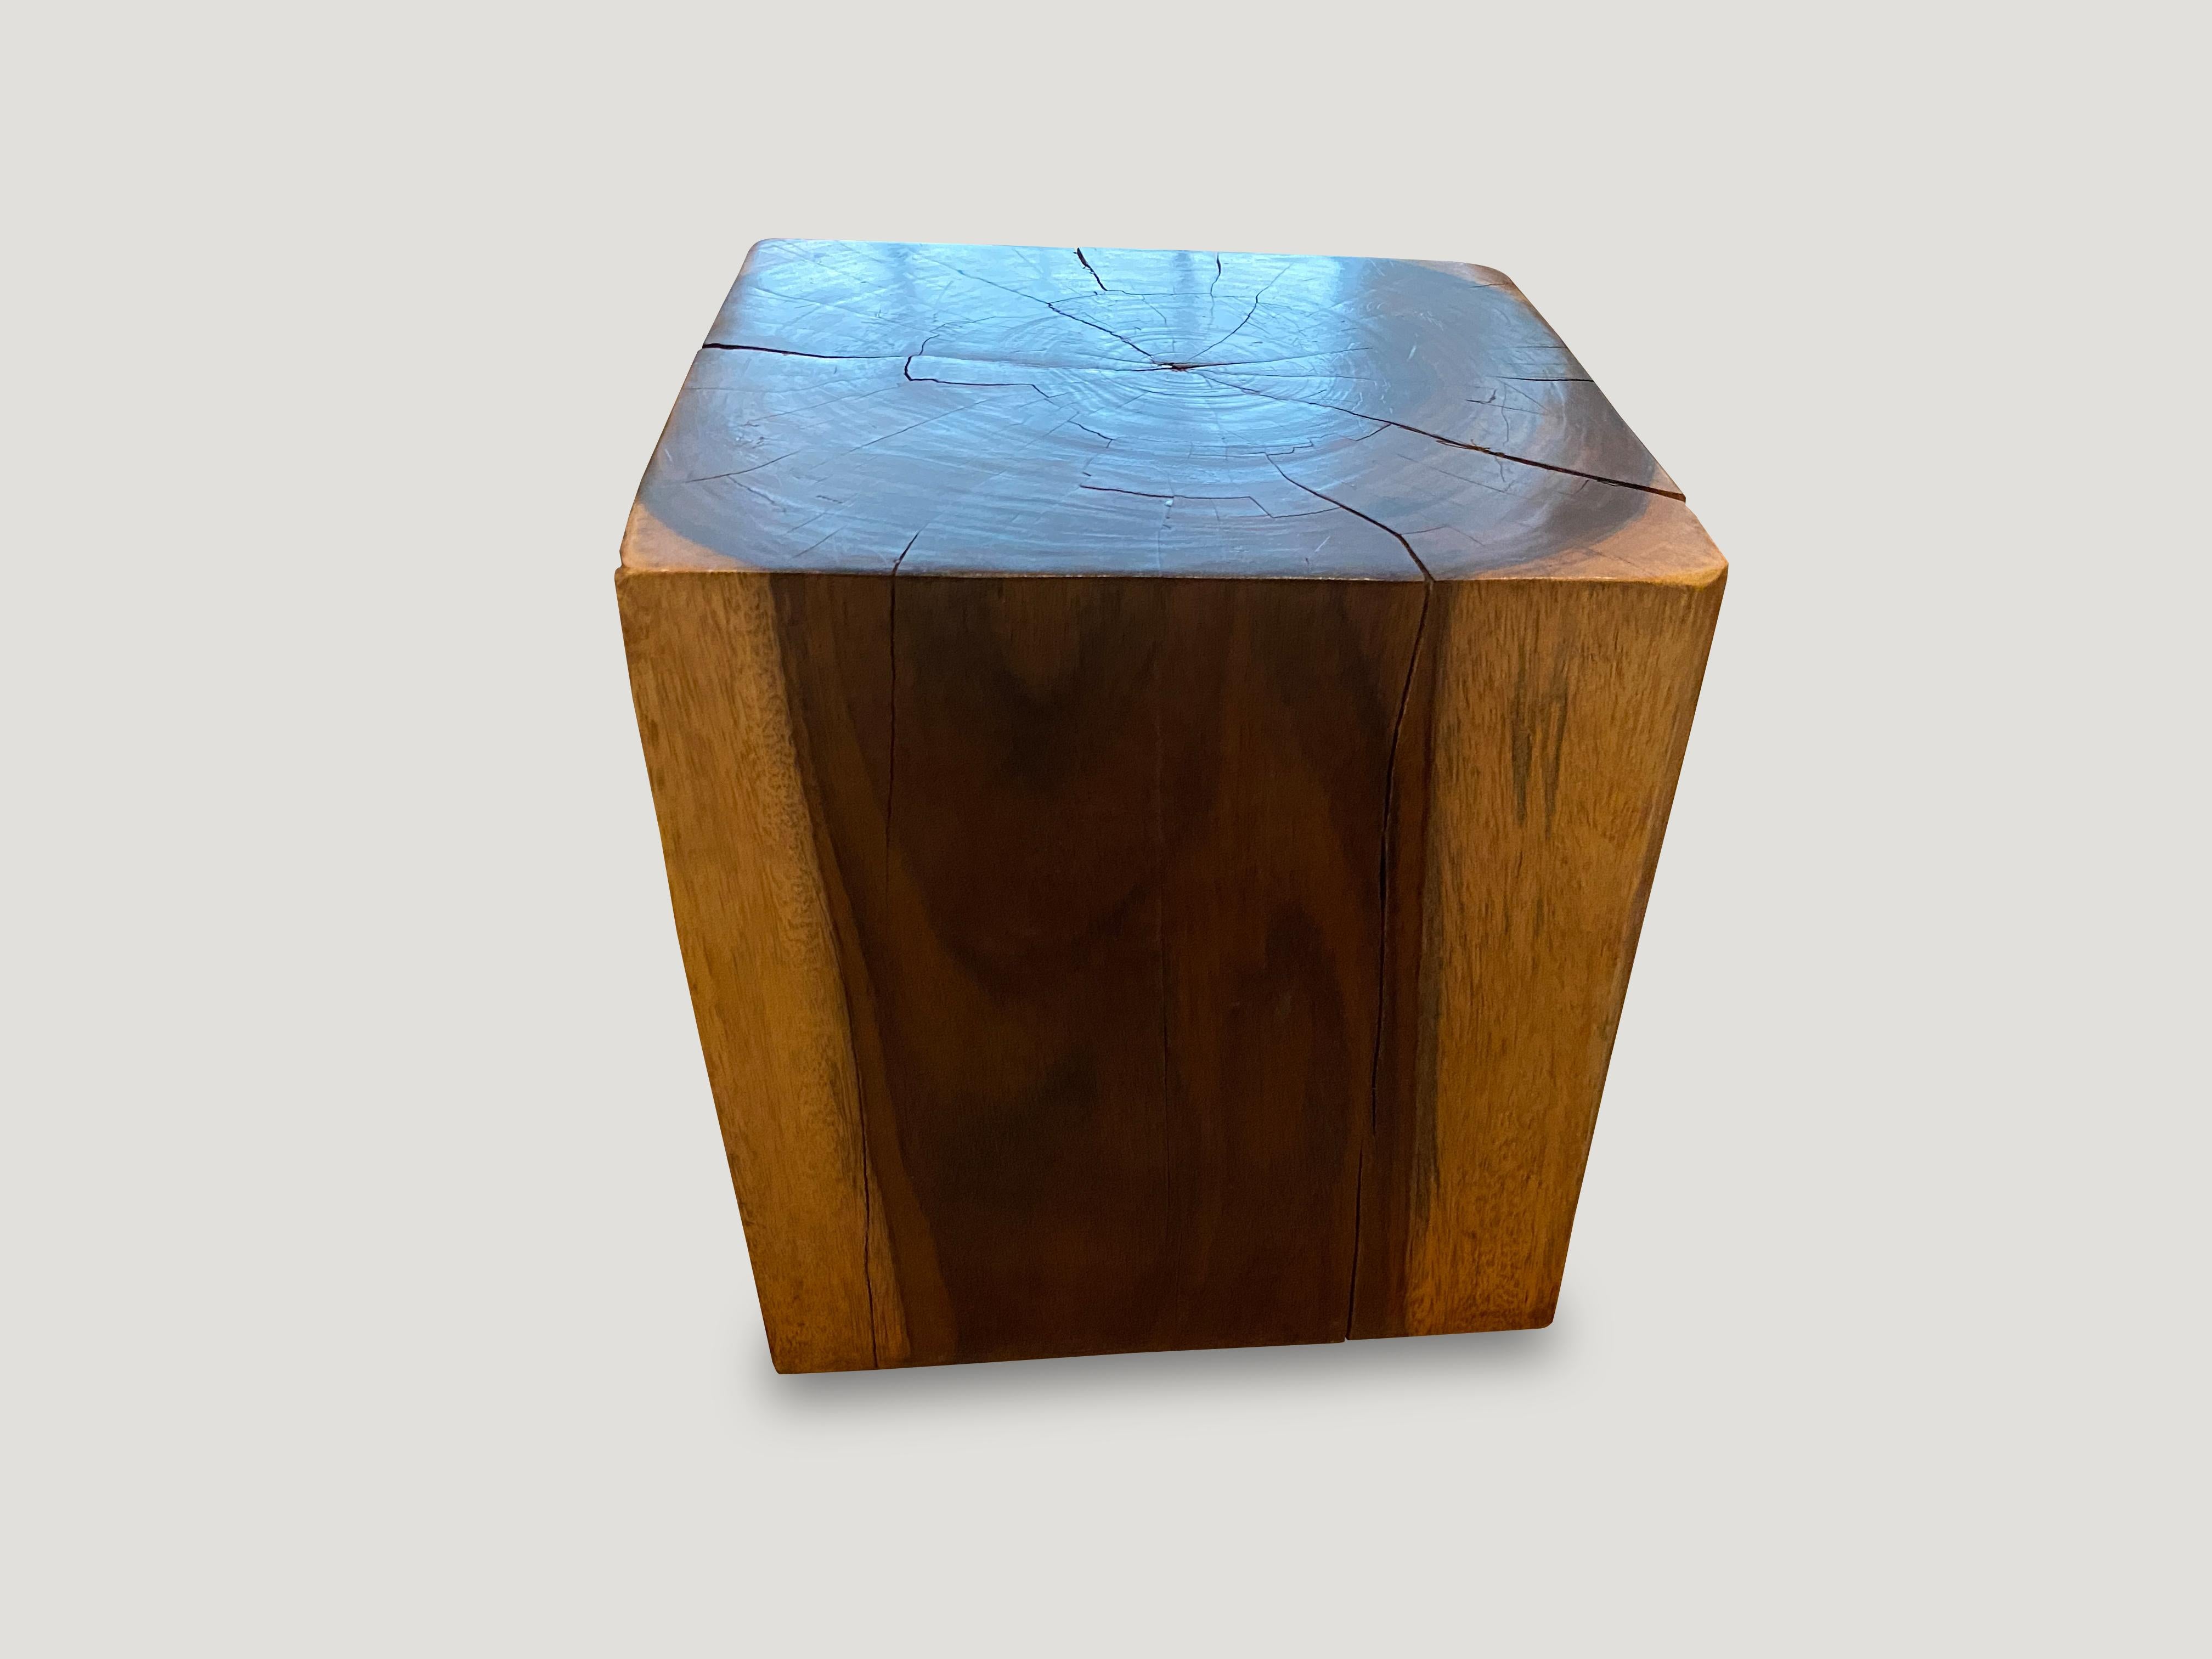 Andrianna Shamaris Sono Wood Cube In Excellent Condition For Sale In New York, NY